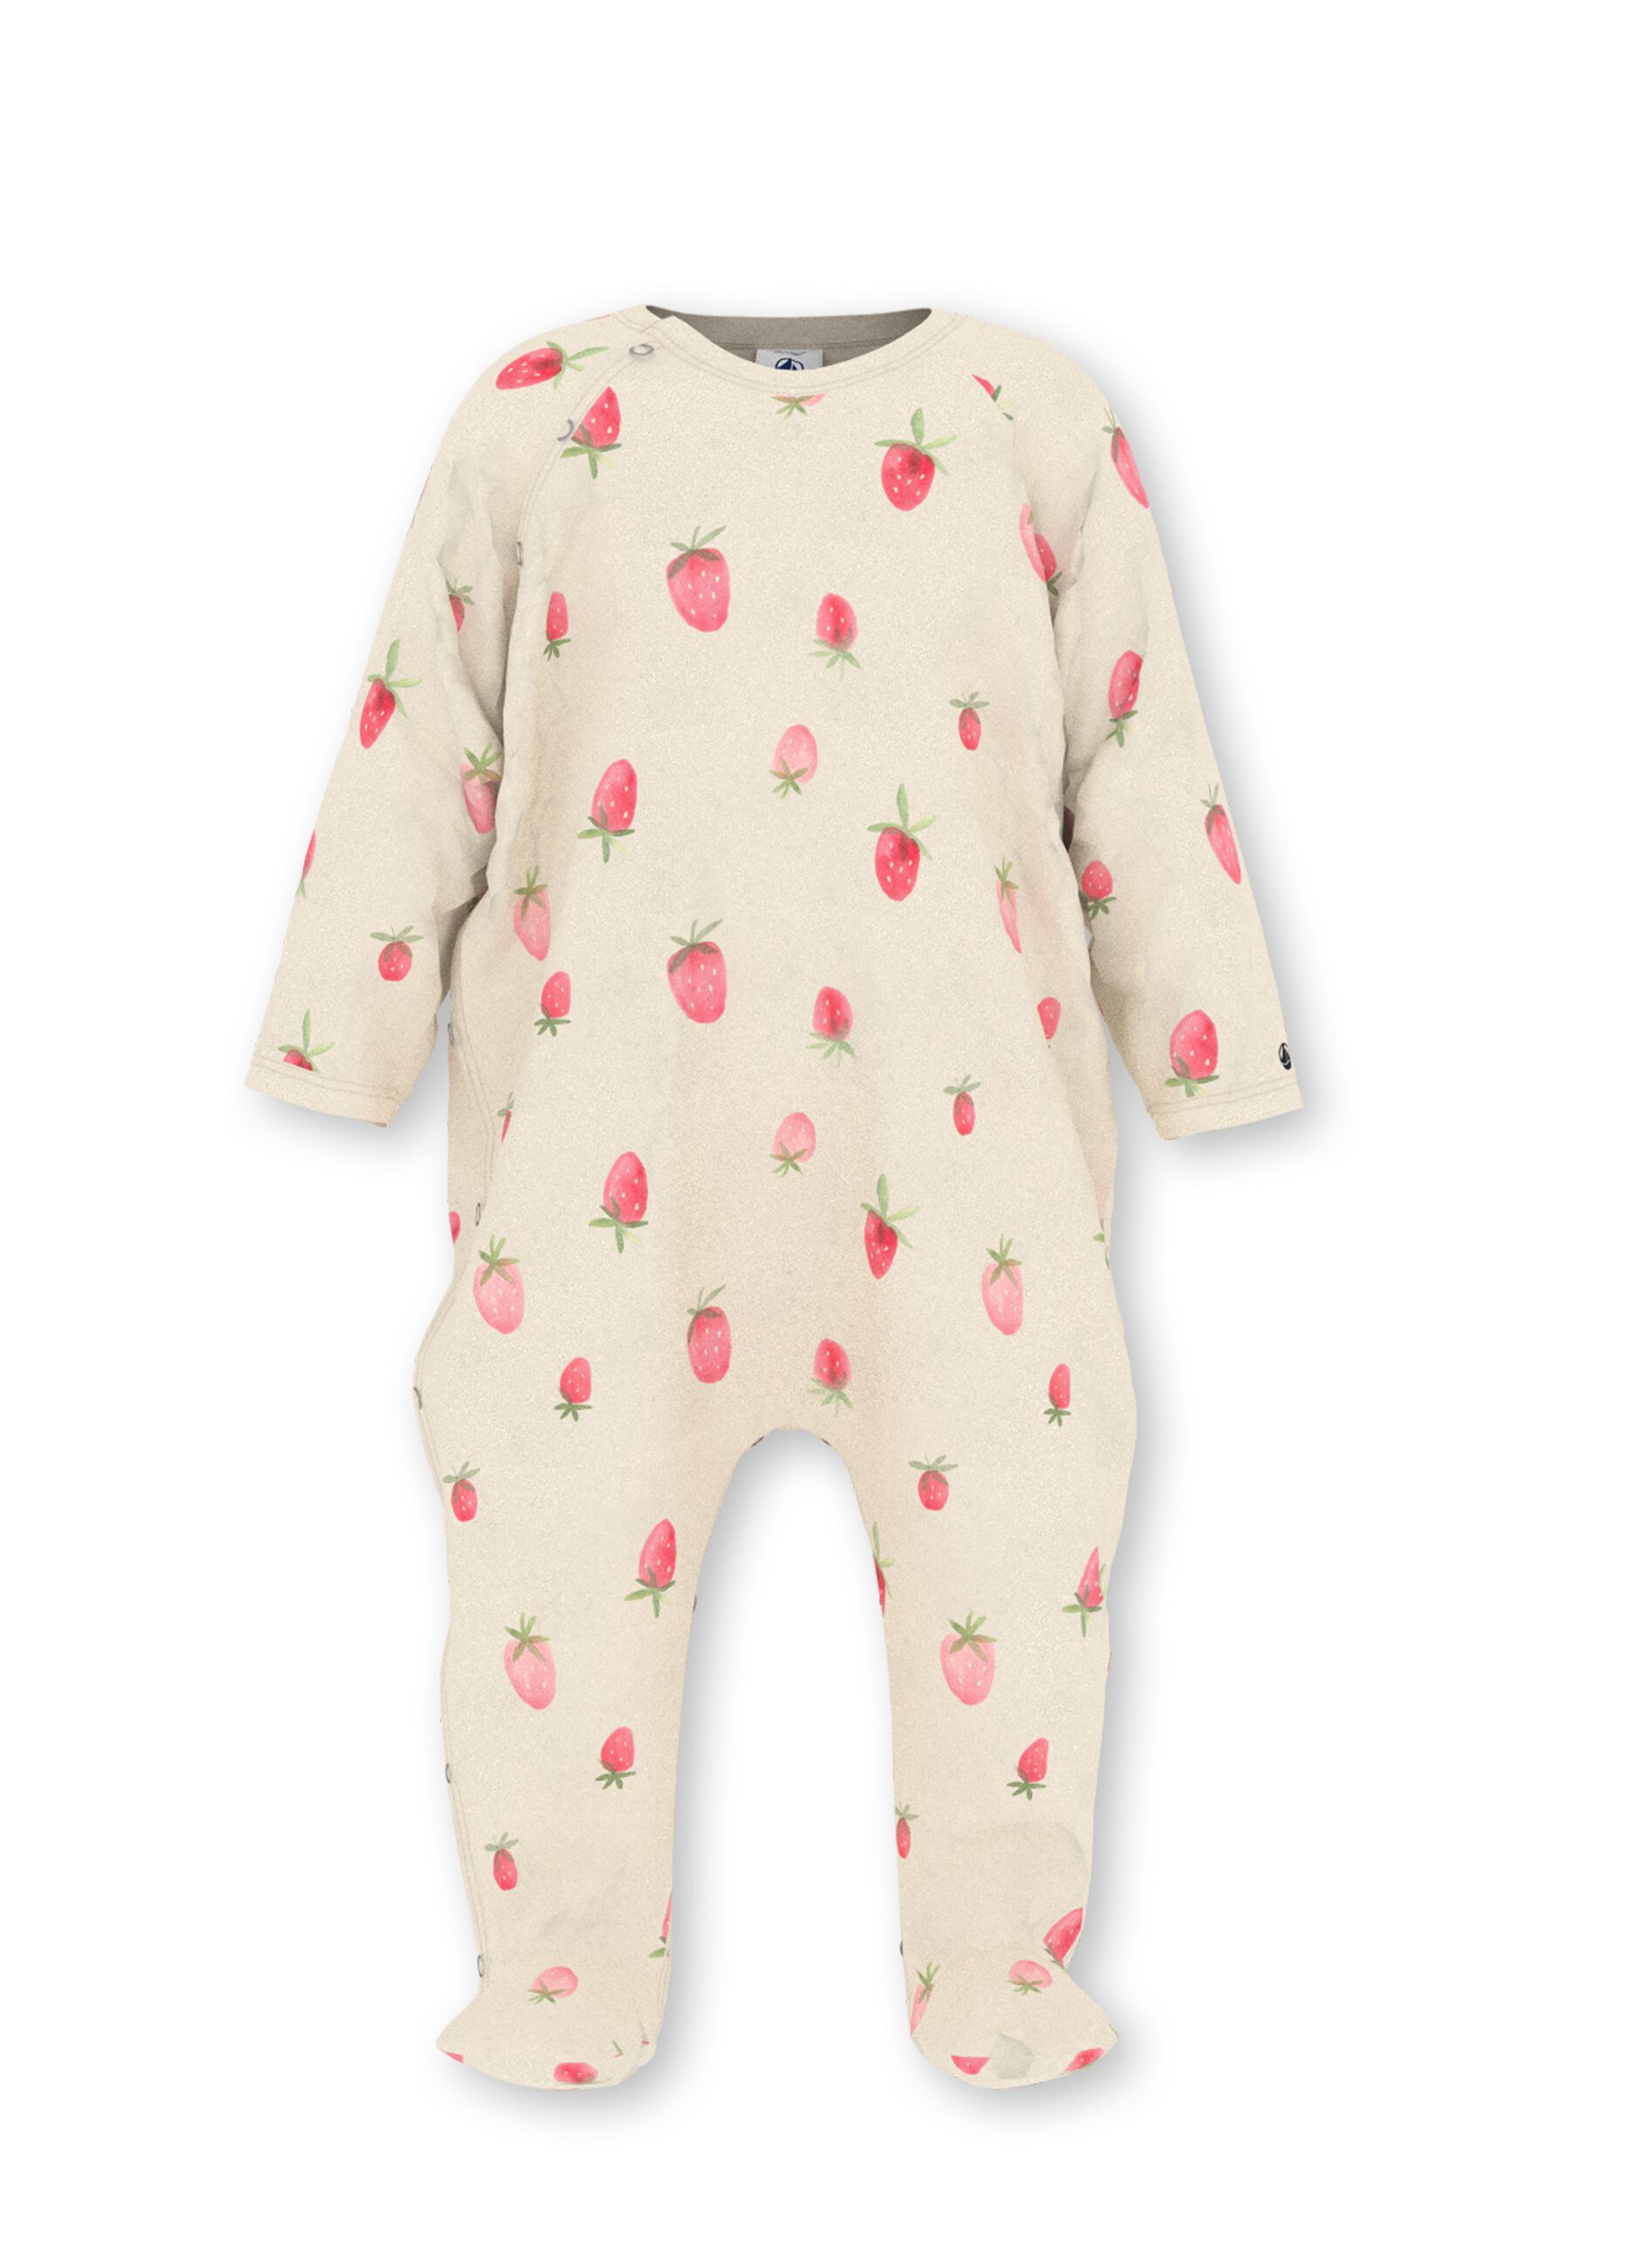 Onesie with feet and strawberries print